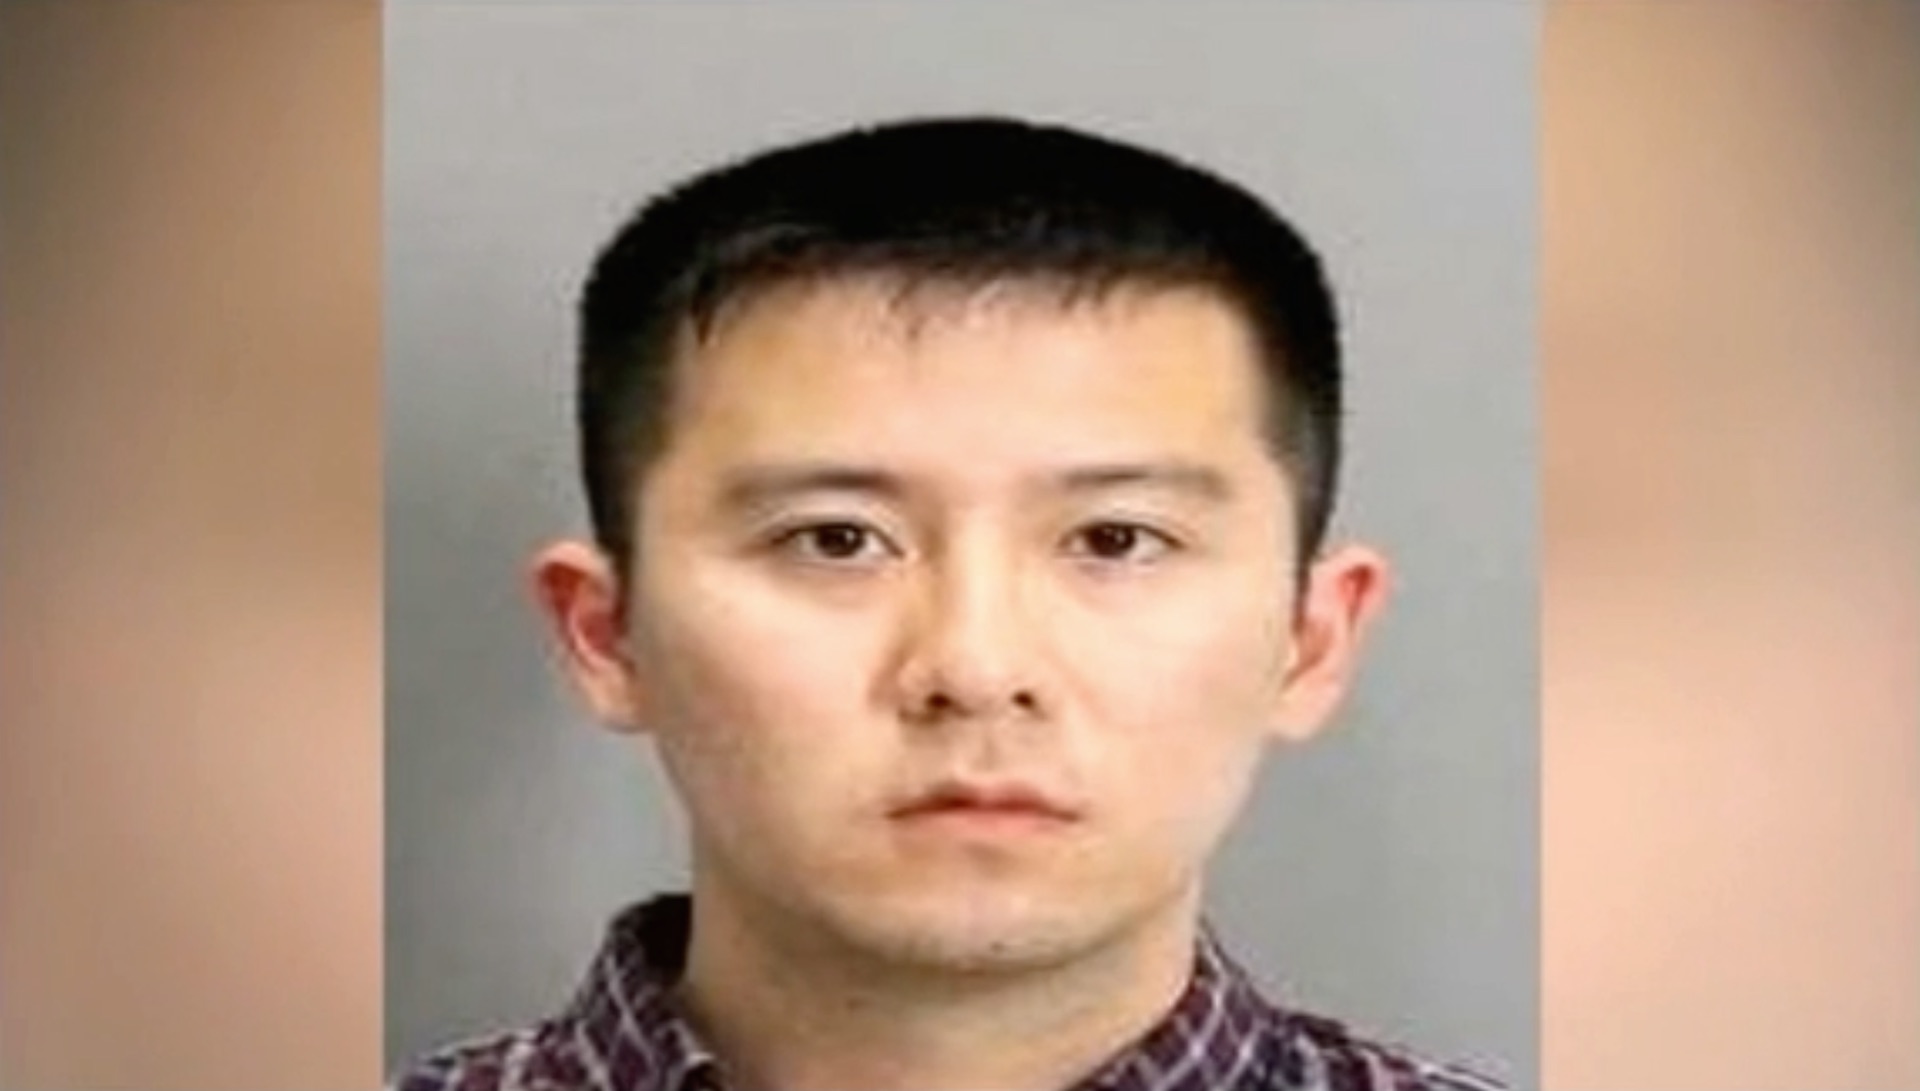 Teachet And Student Hd Sex Video S Download Com - At school, he was the 'cool' teacher. Online, police say, he was a student-seducing  porn star. - The Washington Post